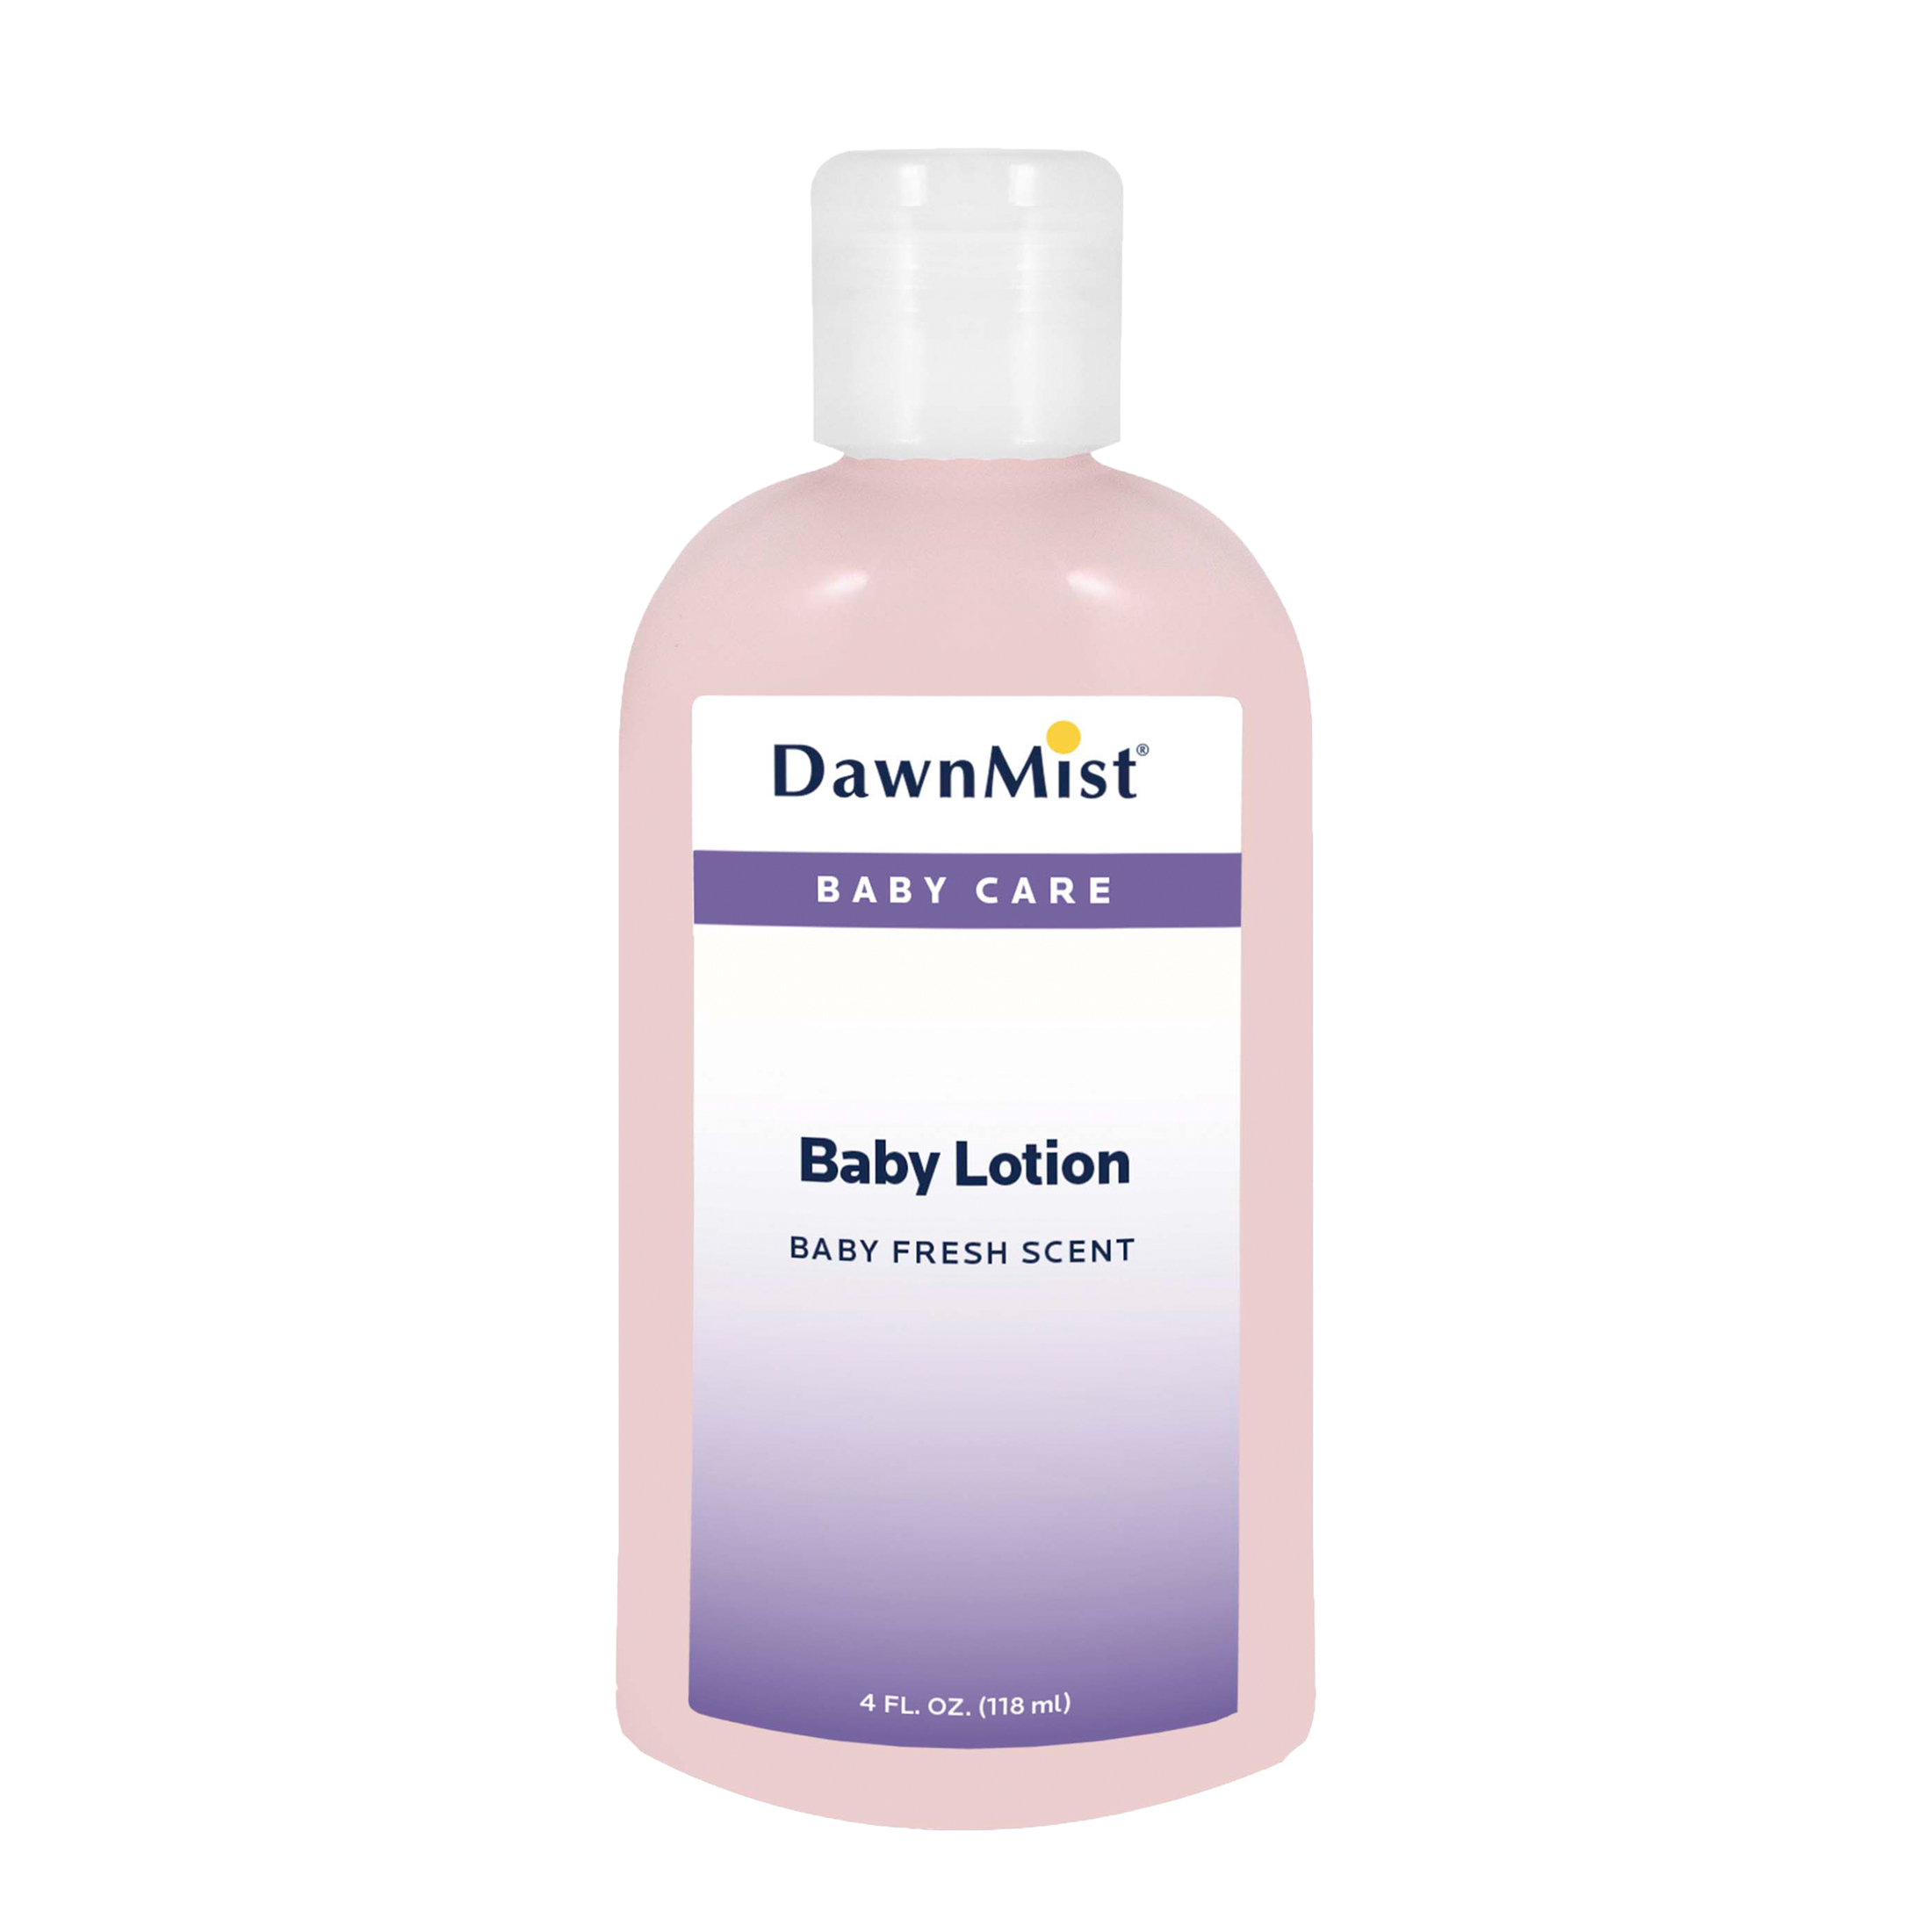 Baby Lotions Products, Supplies and Equipment